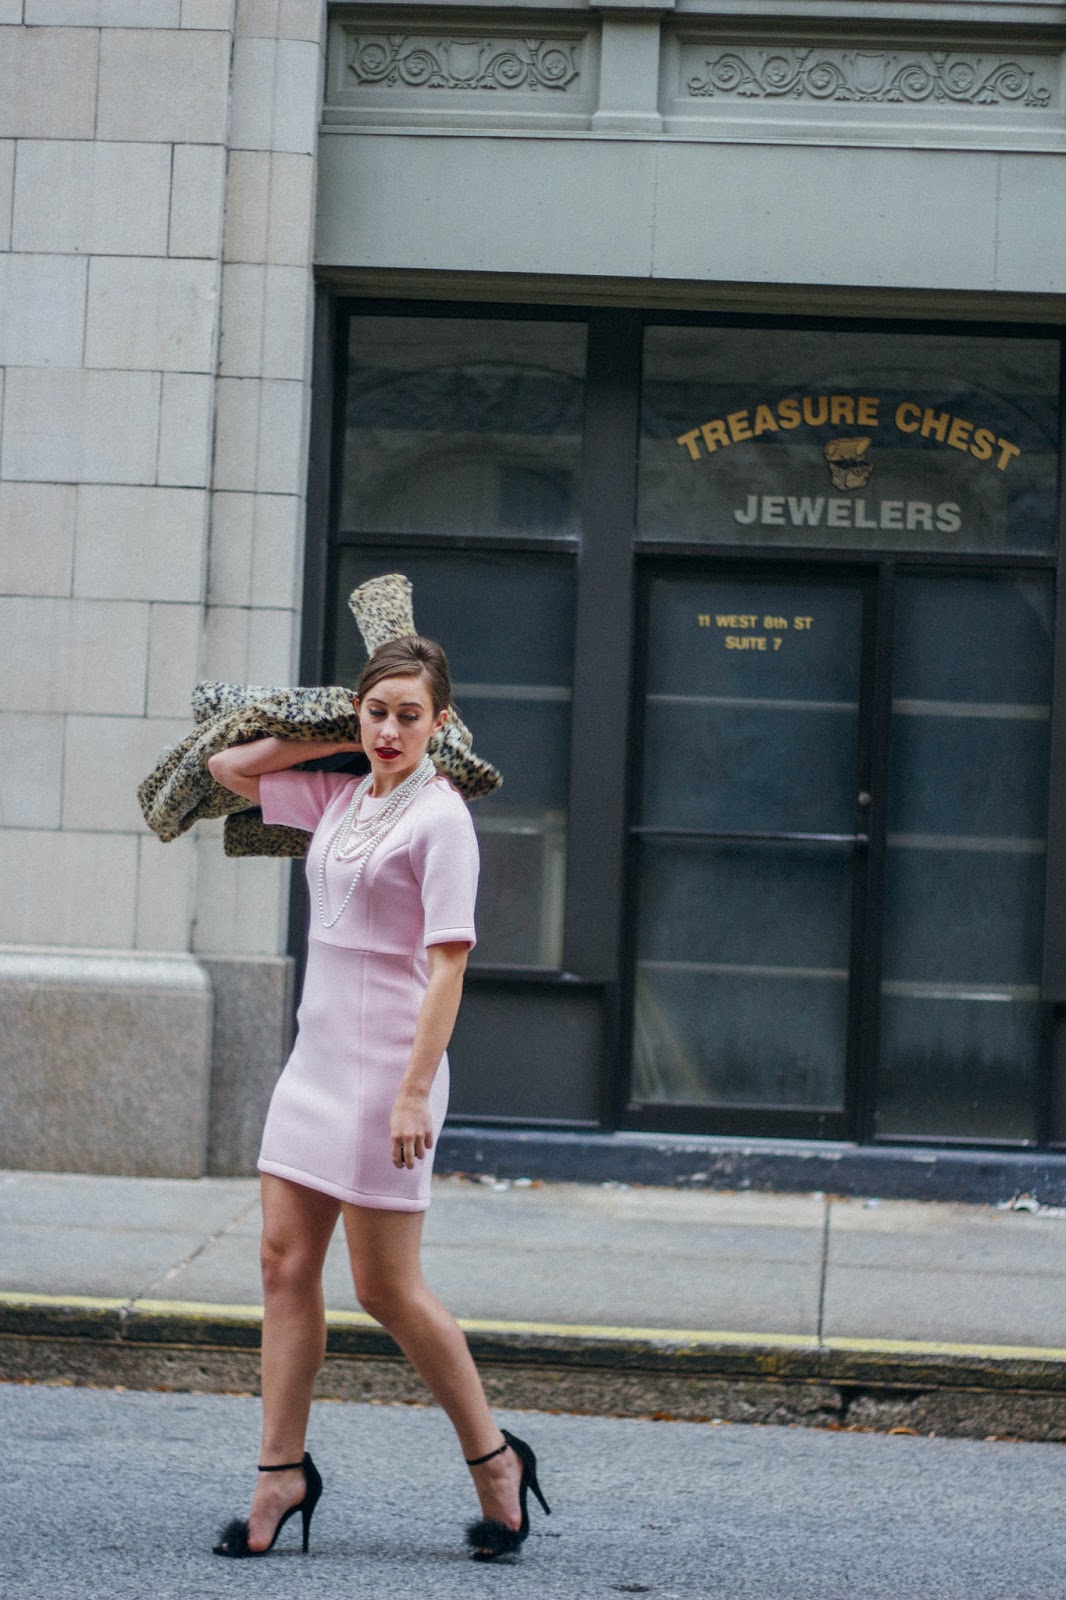 vintage, vintage style, audrey hepburn style, breakfast at tiffany's outfit, modern, pink nasty gal dress, fluffy black heels, retro, film, screenwriting, formal wear, fashion blogger, style blogger, classic look, old hollywood look, hollywood regency outfit,